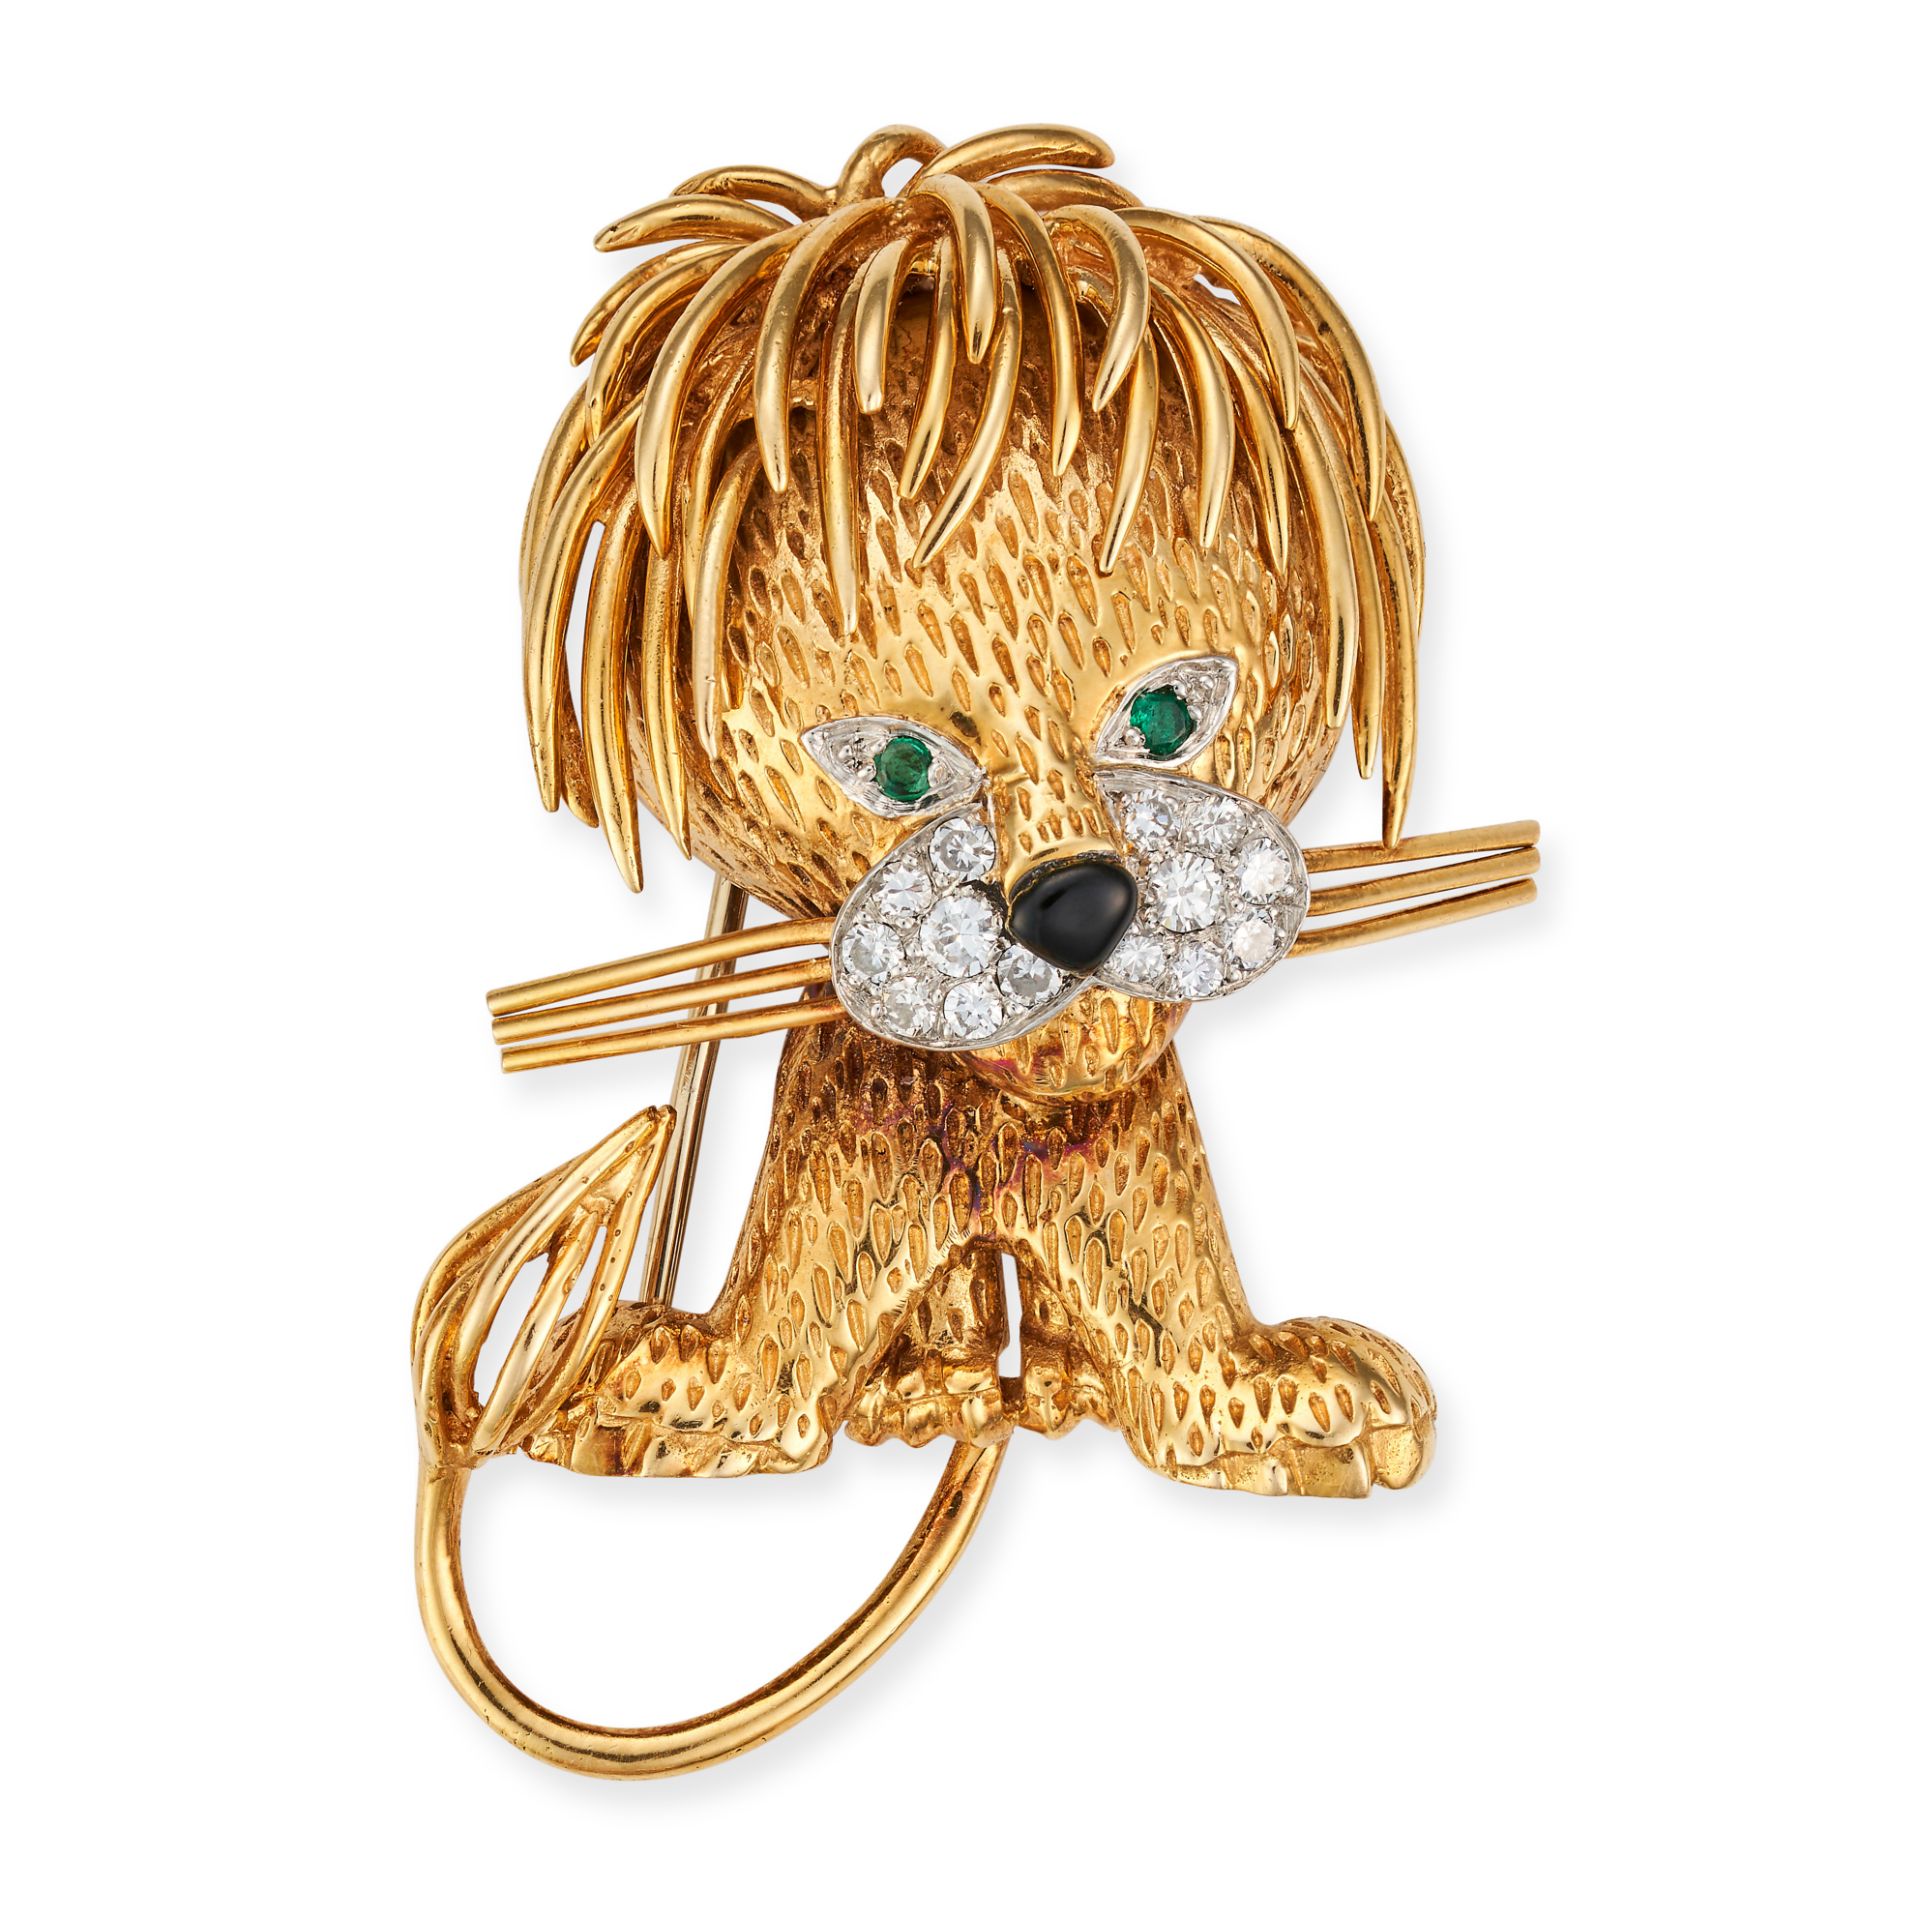 VAN CLEEF & ARPELS, A DIAMOND, EMERALD AND ONYX LION EBOURIFFE BROOCH in yellow gold and platinum...